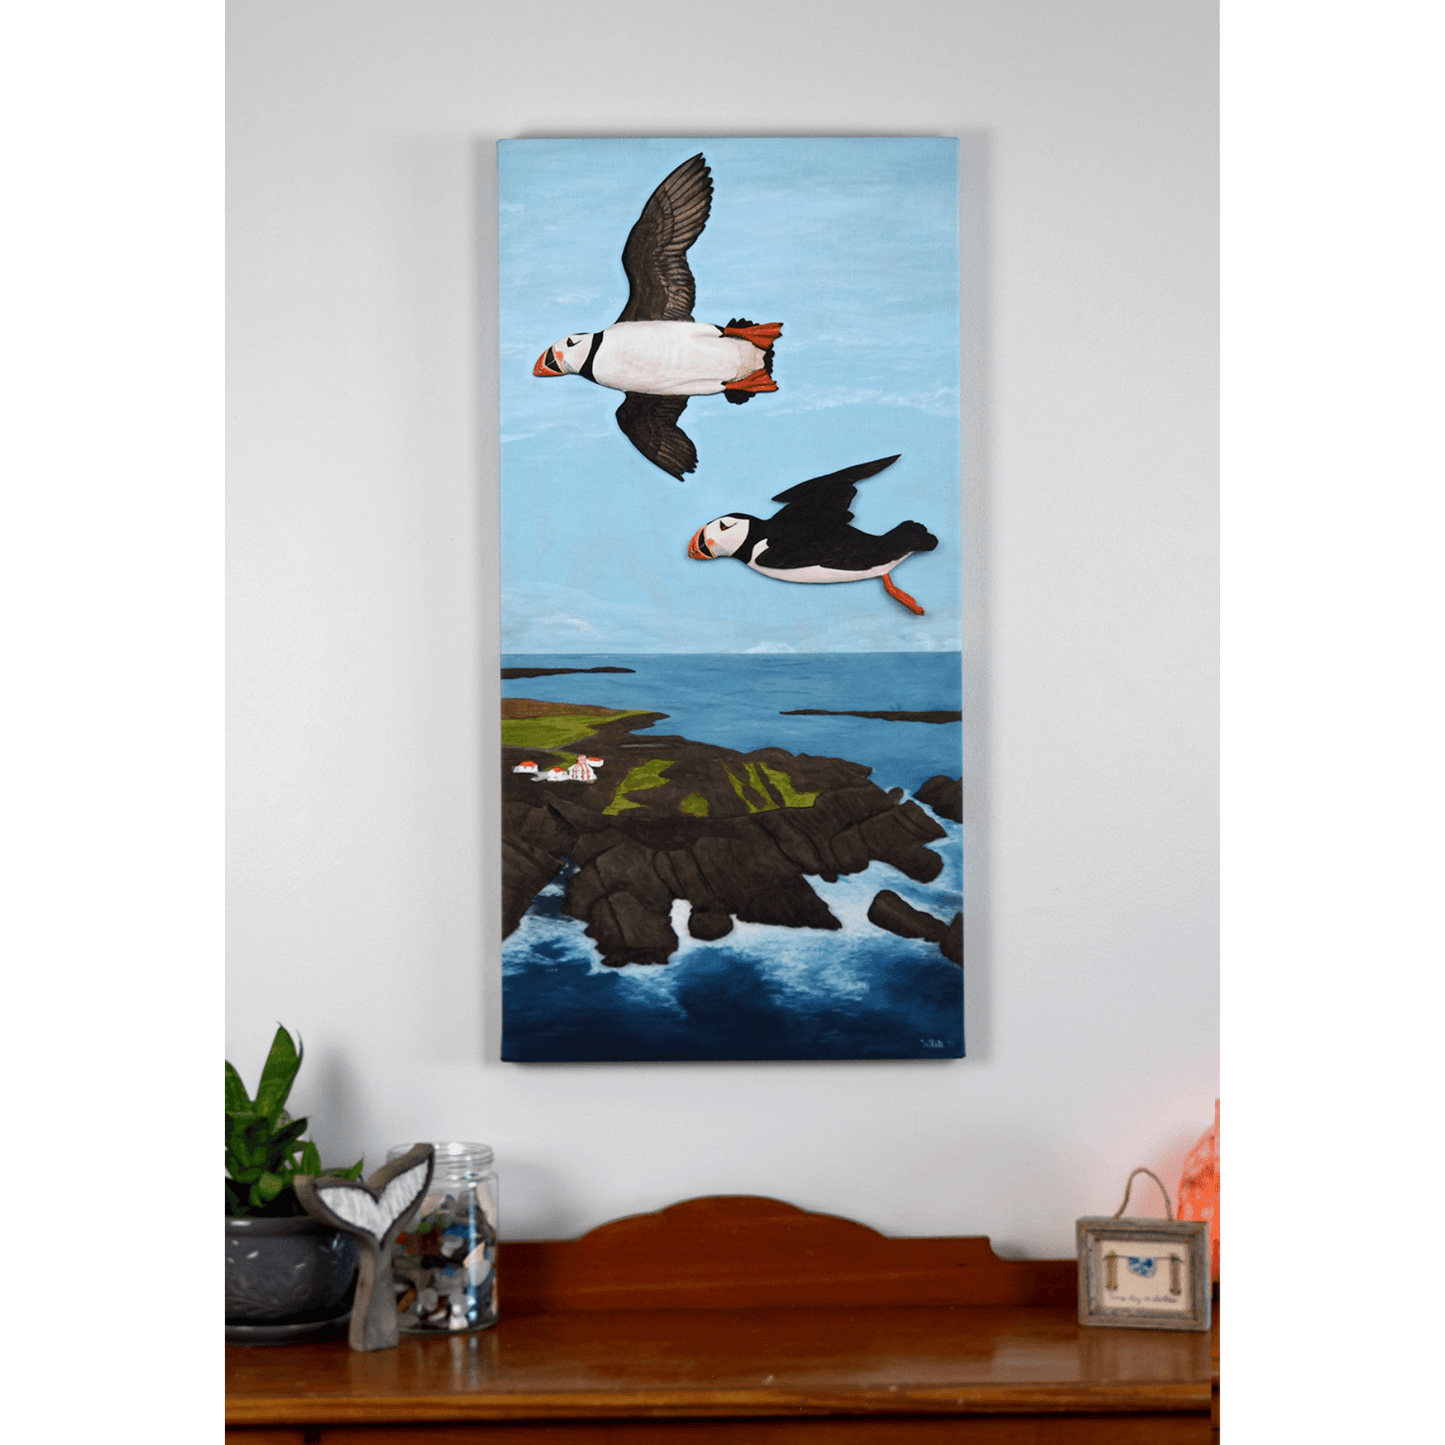 "Over the Cape" reproduction print showcases two puffins flying over the rugged Newfoundland coast.